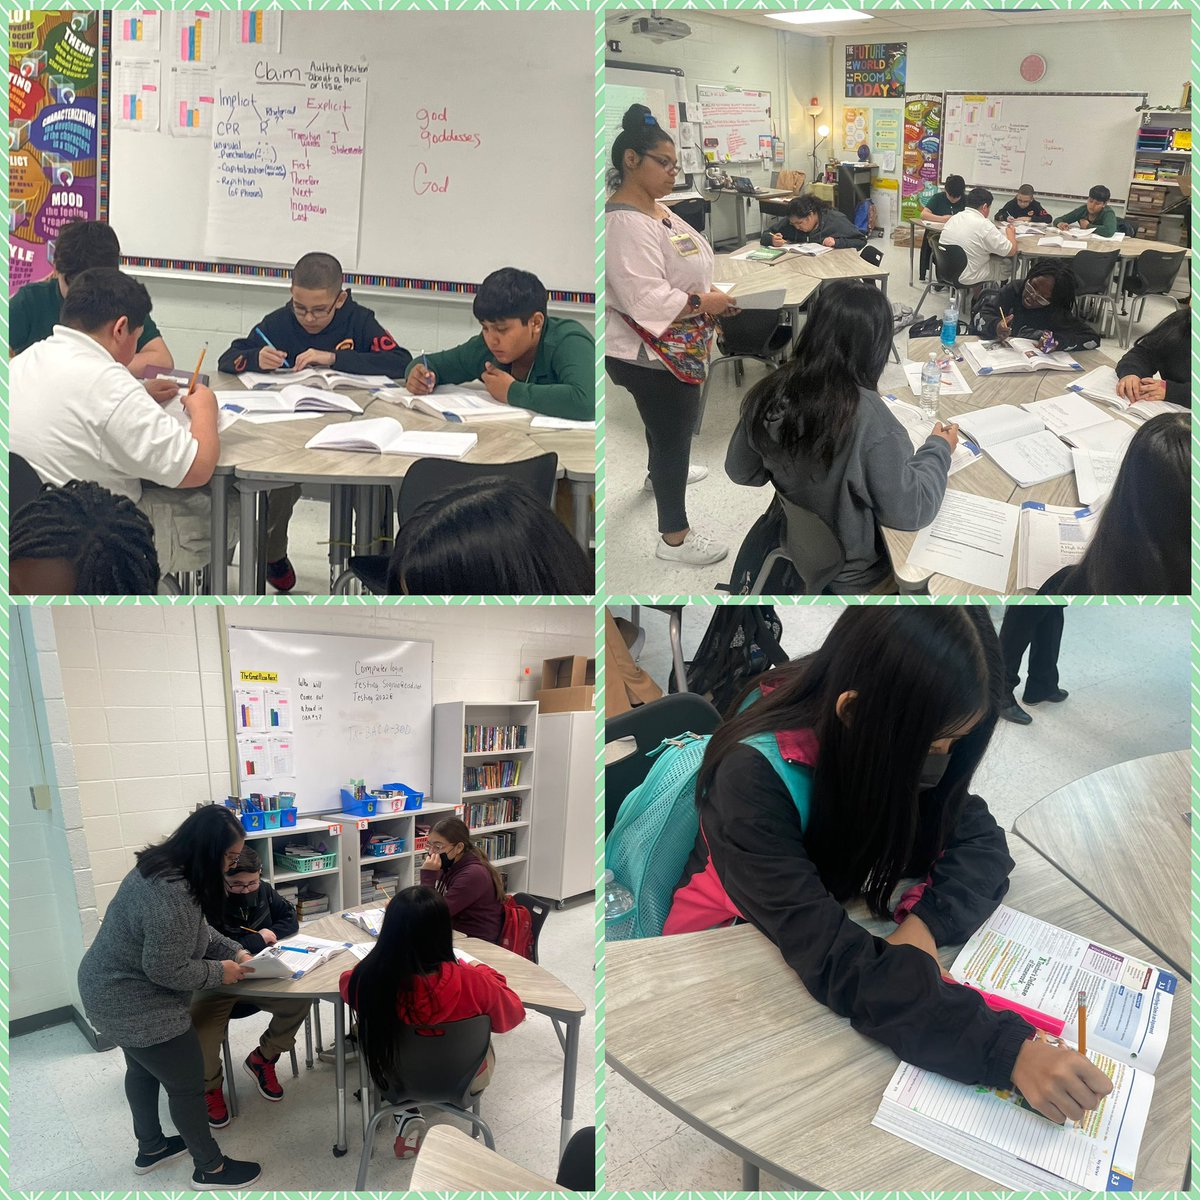 Absolutely loved seeing structure-forward teaching around complex argumentative texts in 6th gr. Students were doing the thinking and learning! Yes, @ETWrennMS! #standardsdriven @swcantu @cmperez789 @rabago_leslie #proud @EdgewoodLeads @teri_silva